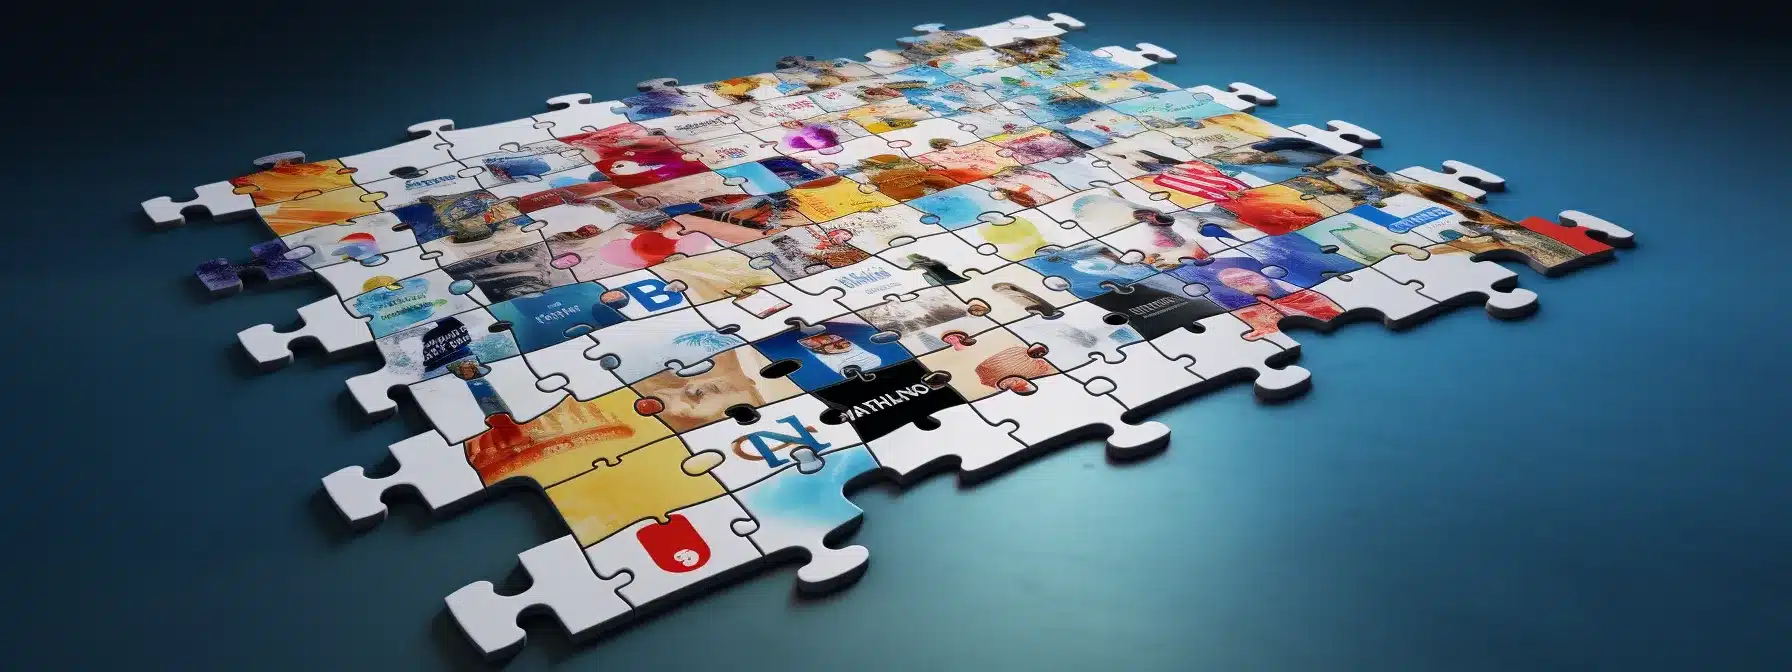 A Completed Puzzle Depicting A Brand'S Digital Identity With Various Pieces Representing Logos, Slogans, Social Media Presence, And Digital Marketing Strategies, All Fitting Together Seamlessly.